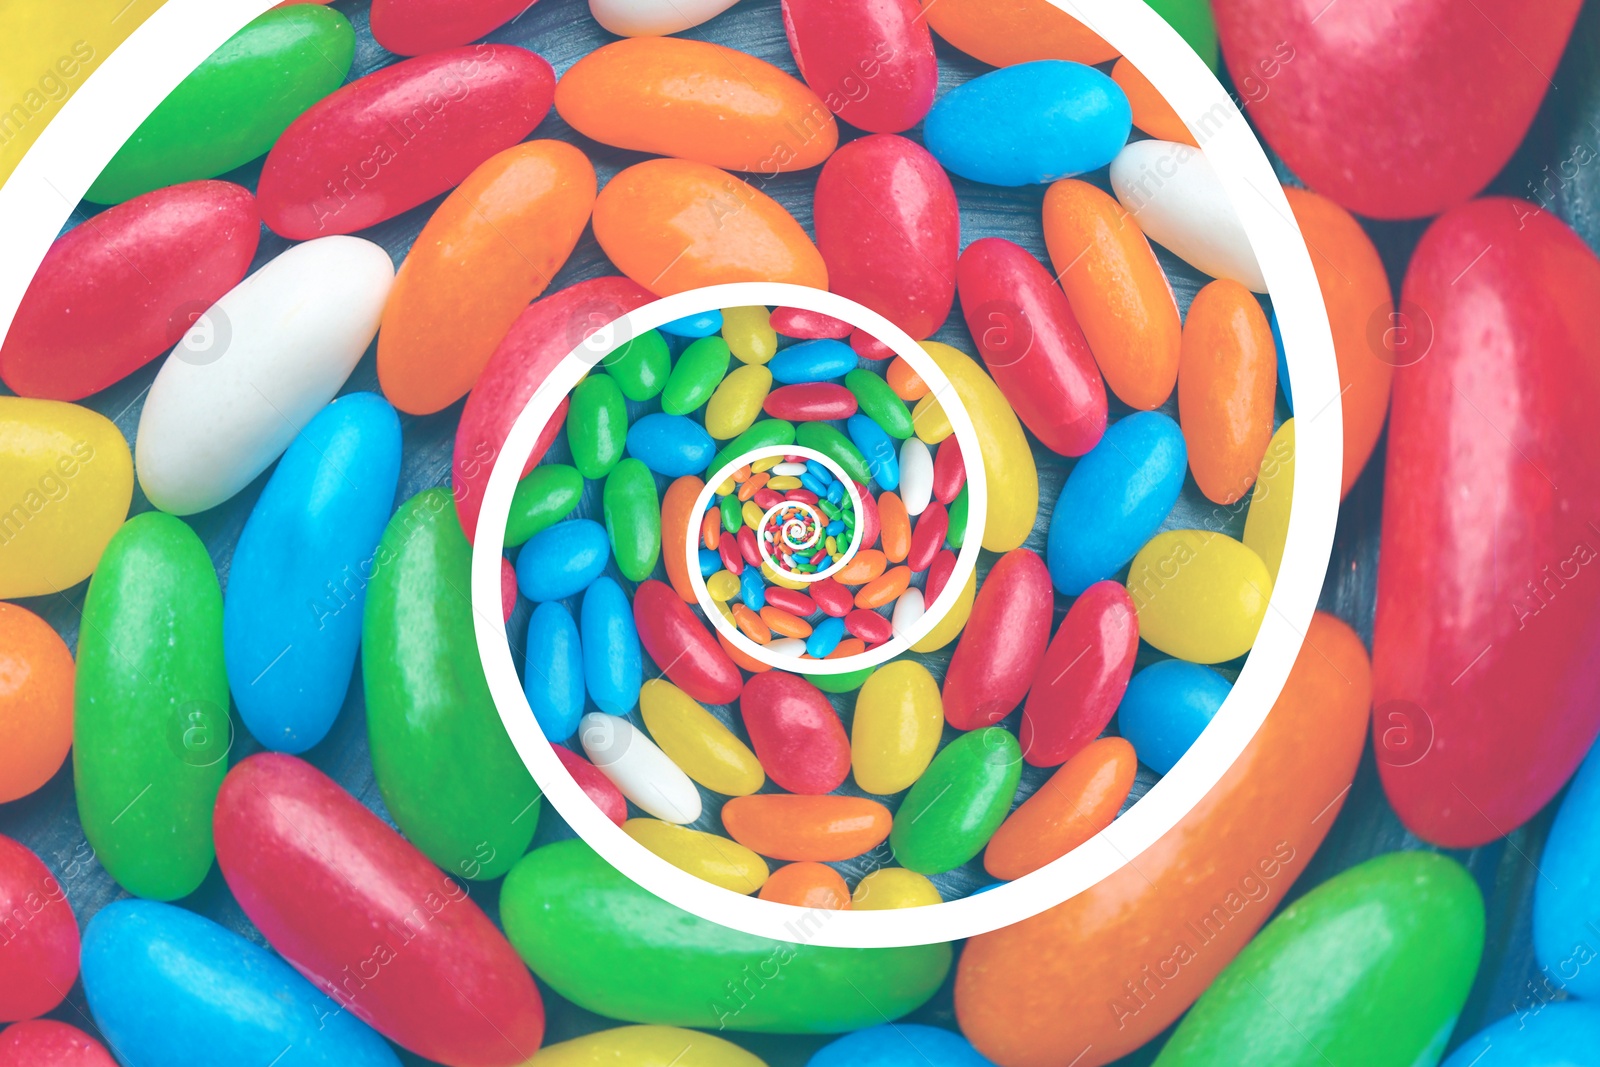 Image of Whirl of many colorful jelly bean candies as background